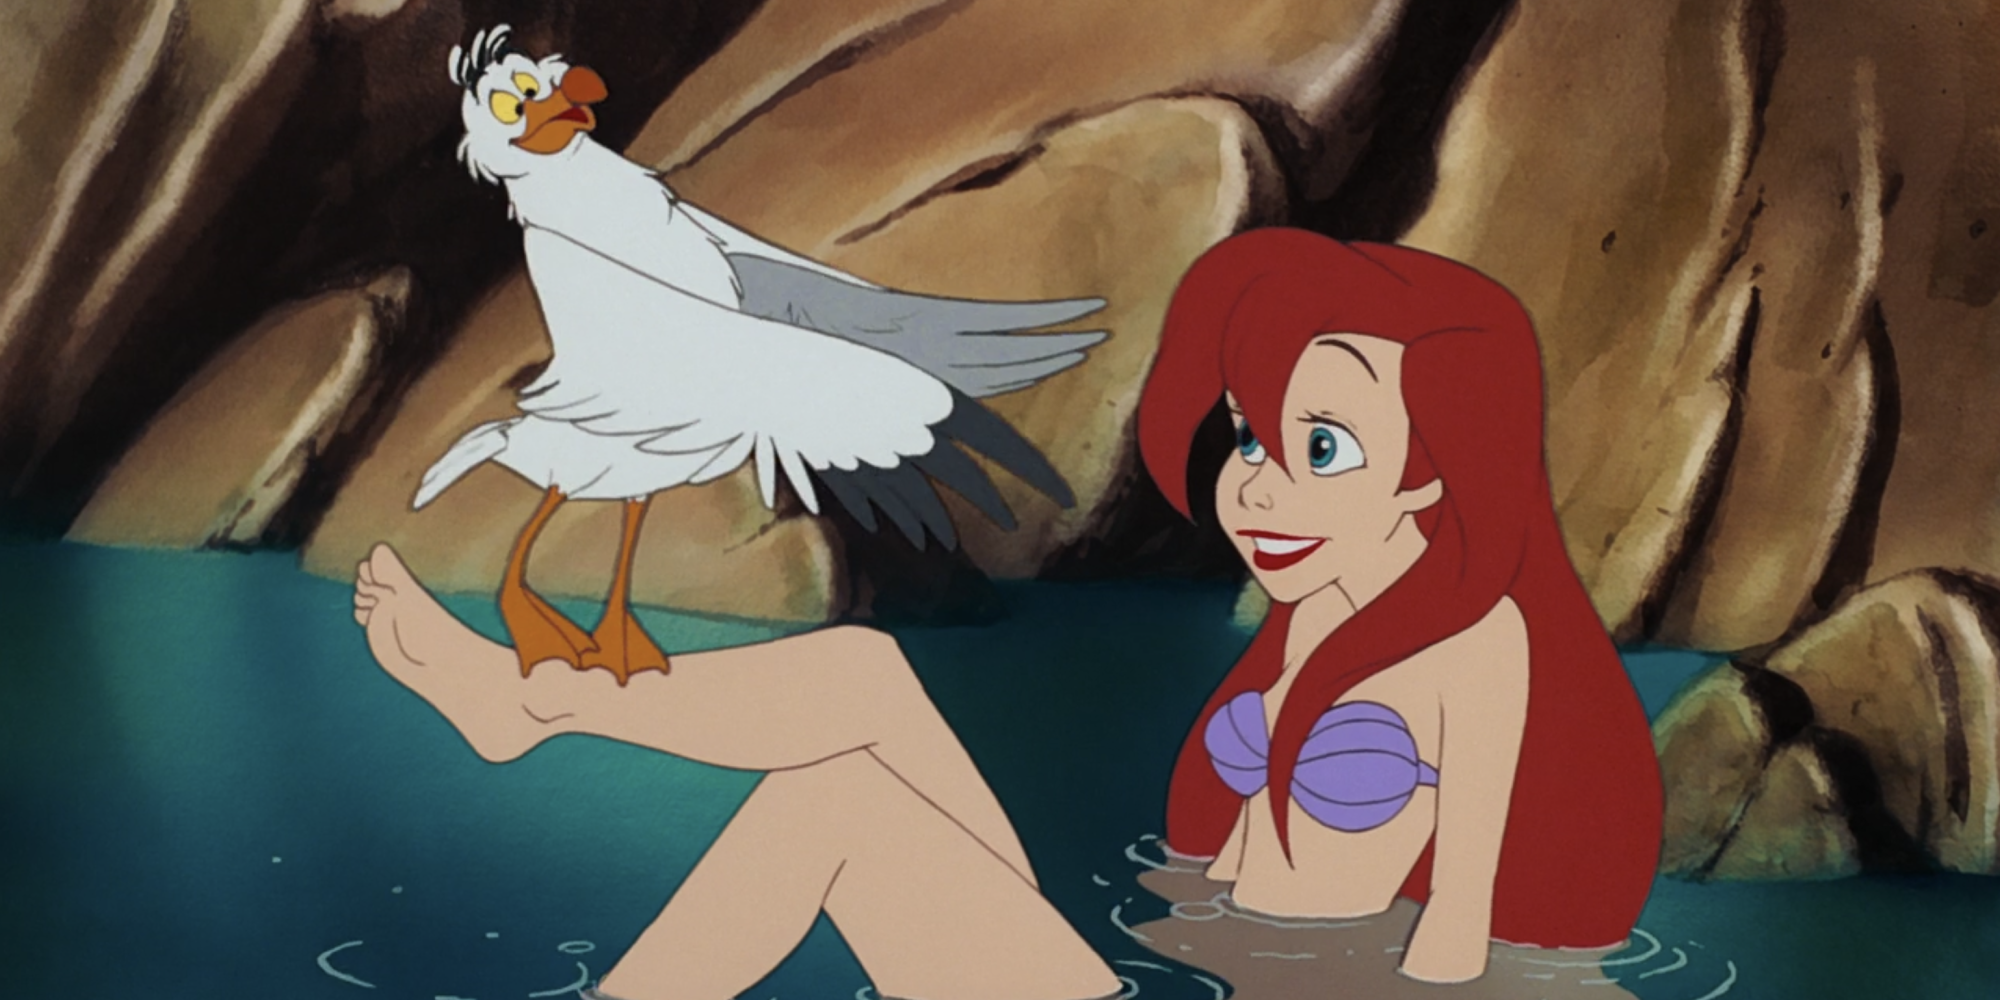 Ariel bathes in a pool in The Little Mermaid.